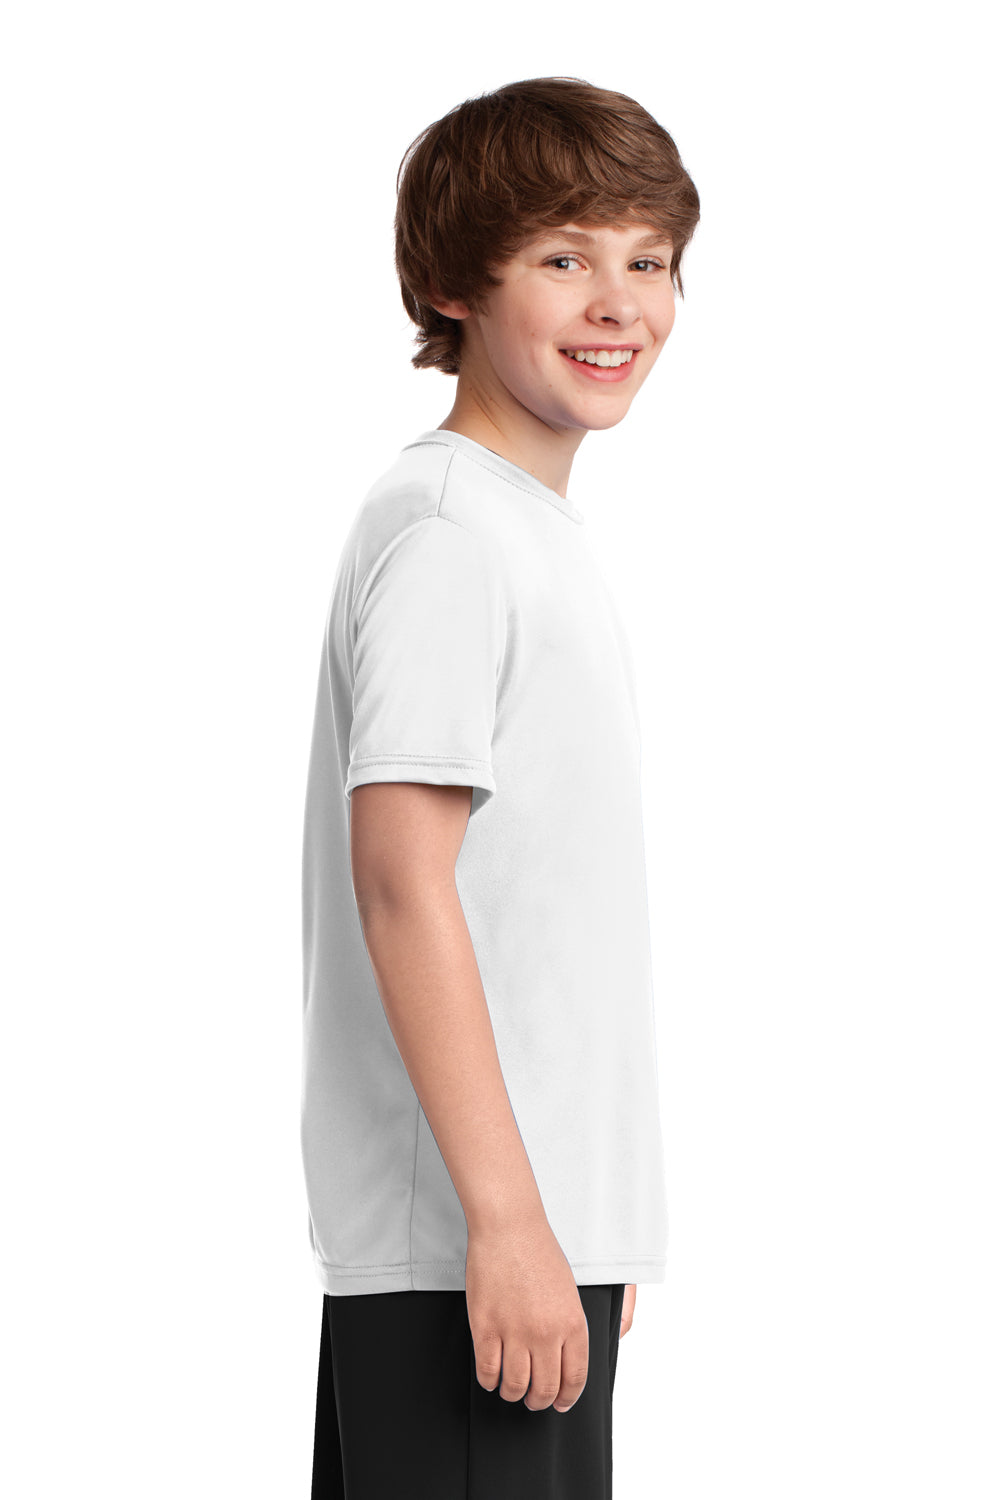 Port & Company PC380Y Youth Dry Zone Performance Moisture Wicking Short Sleeve Crewneck T-Shirt White Side